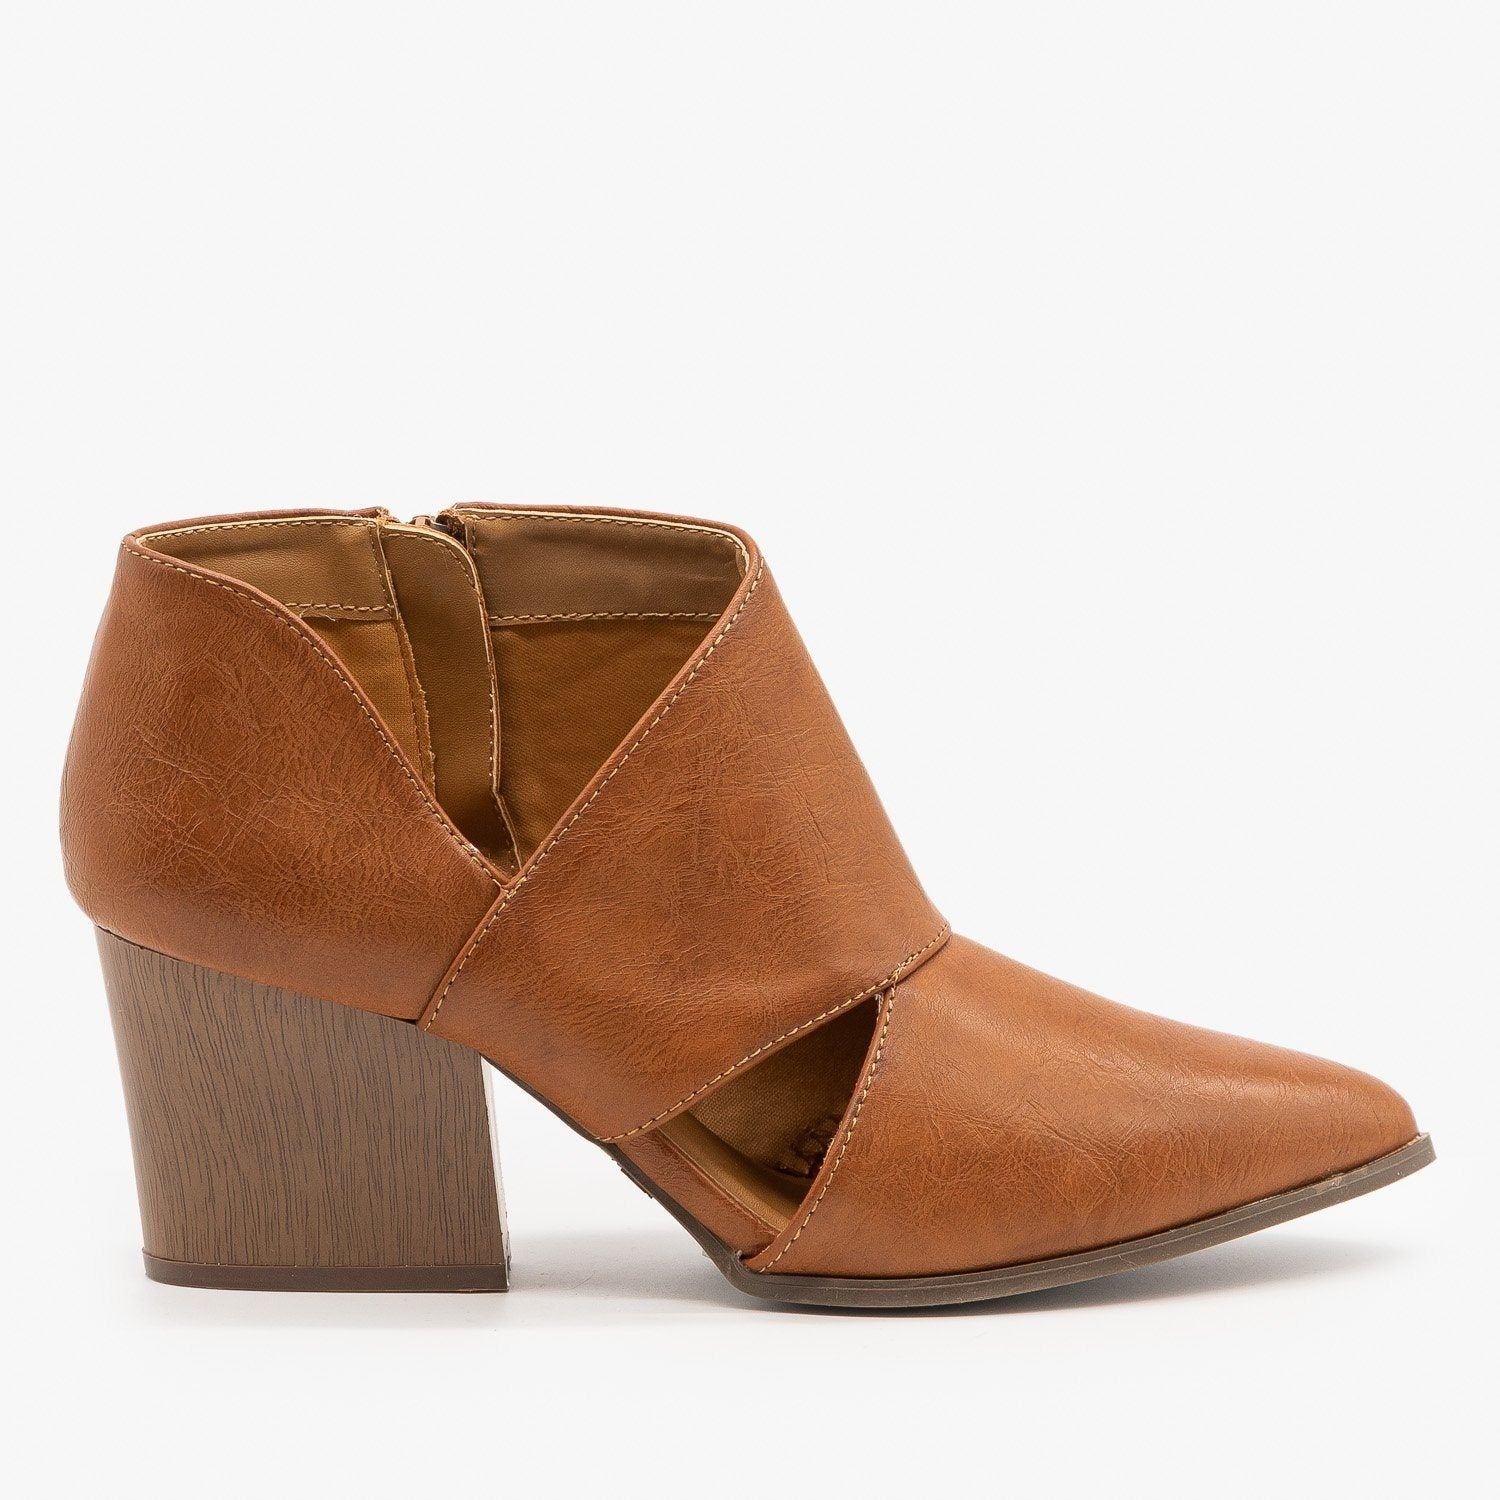 Triangle Cut Out Ankle Booties - Qupid 